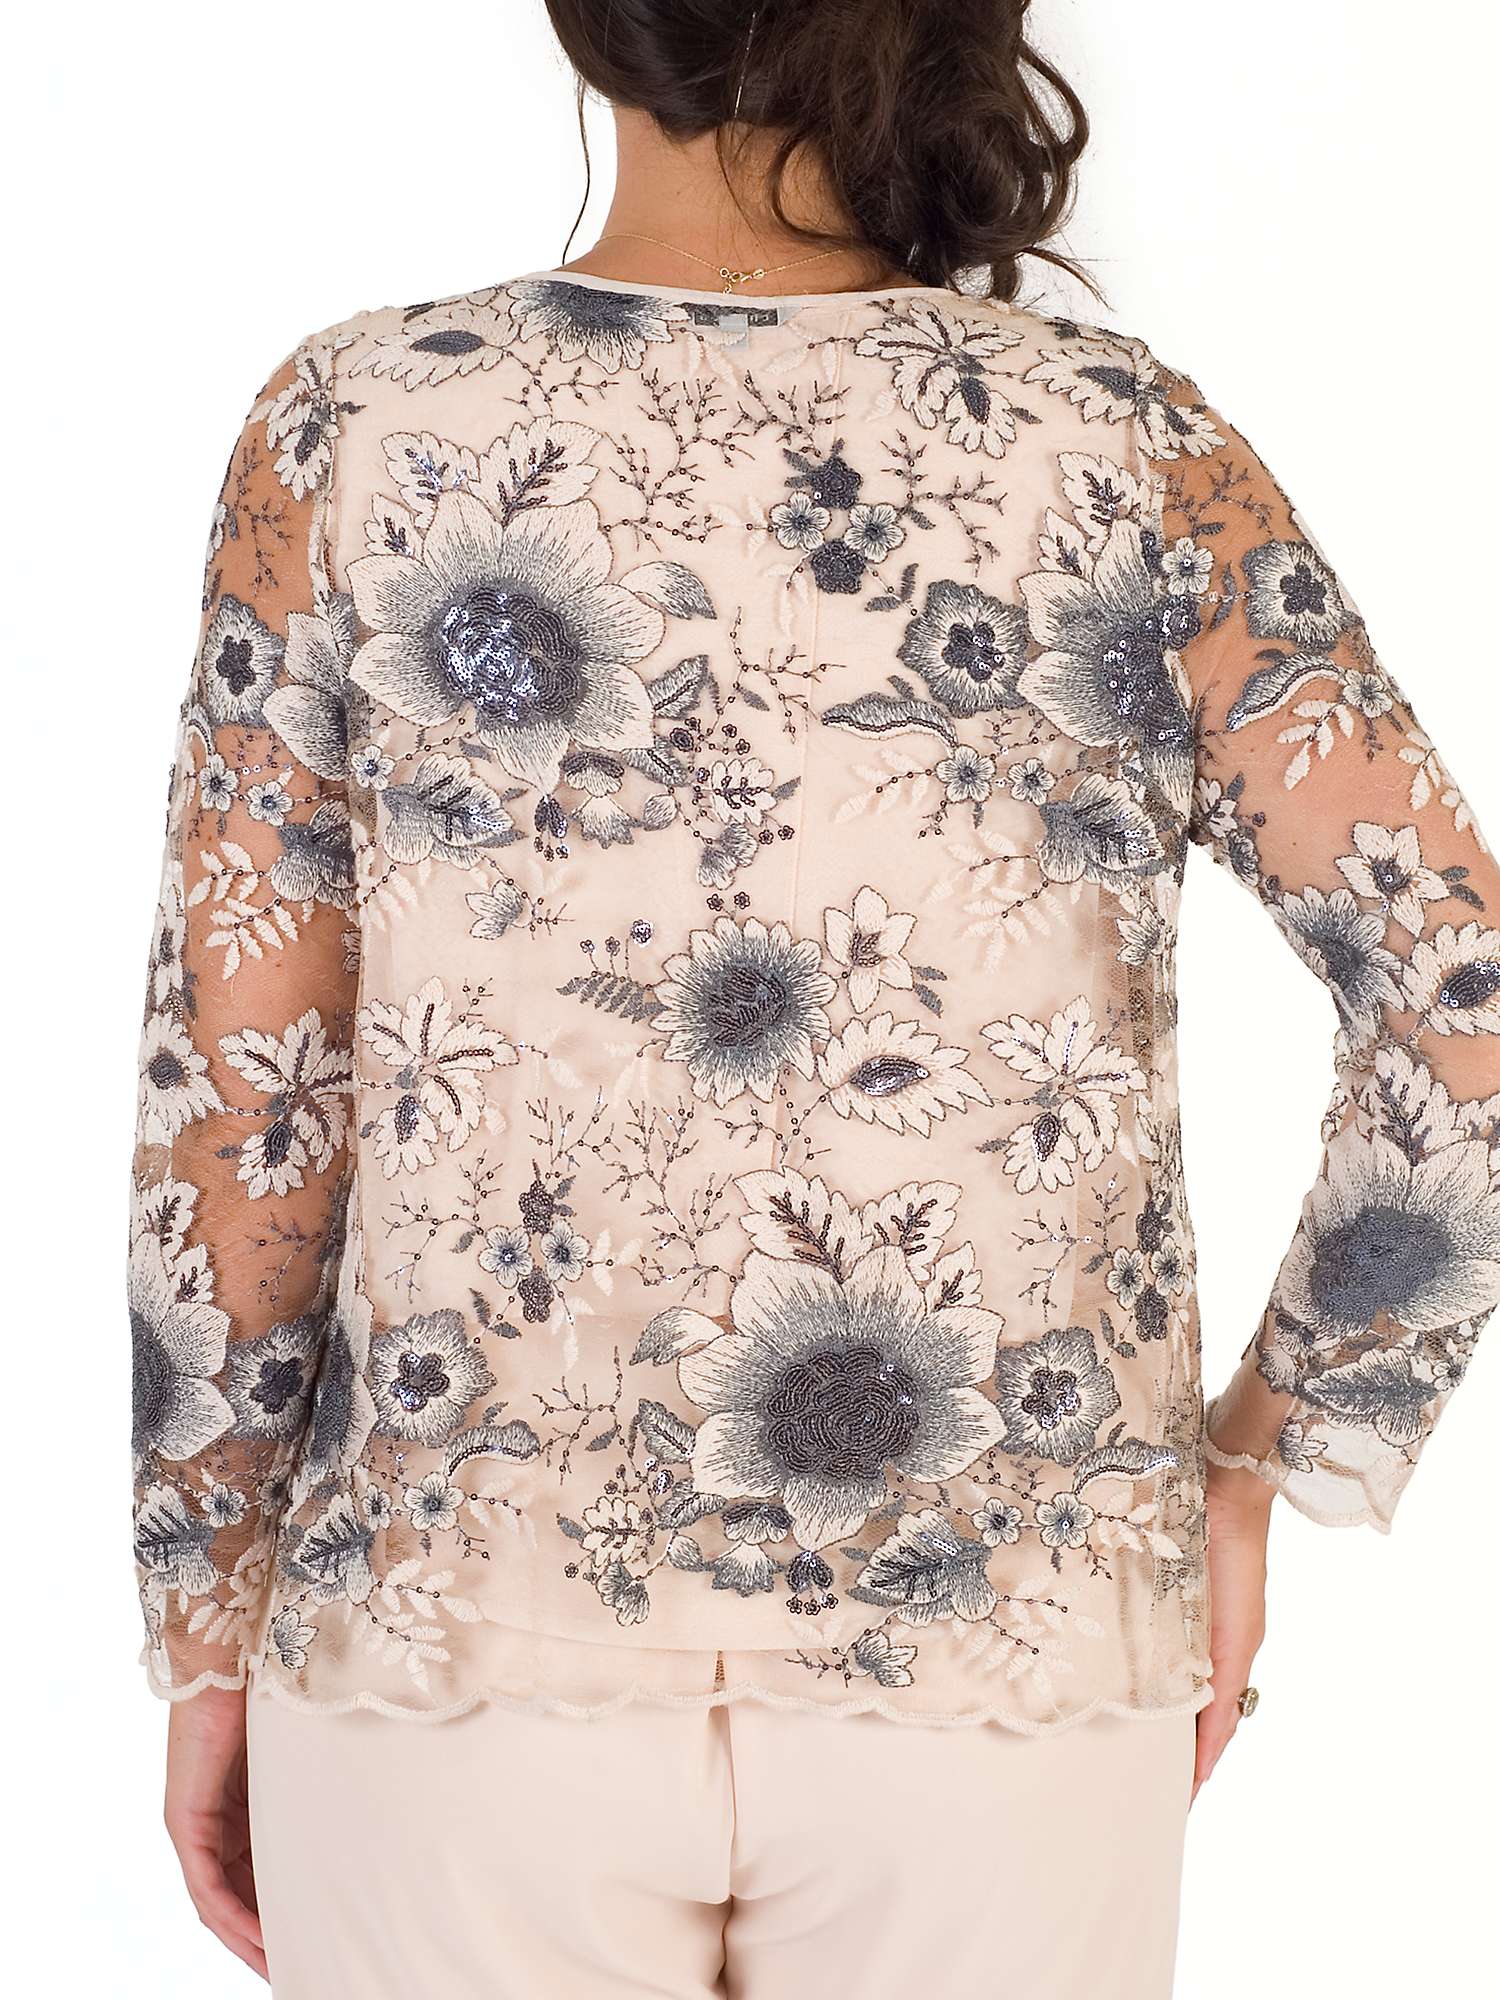 Chesca Sequin And Embroidered Mesh Jacket, Blush at John Lewis & Partners